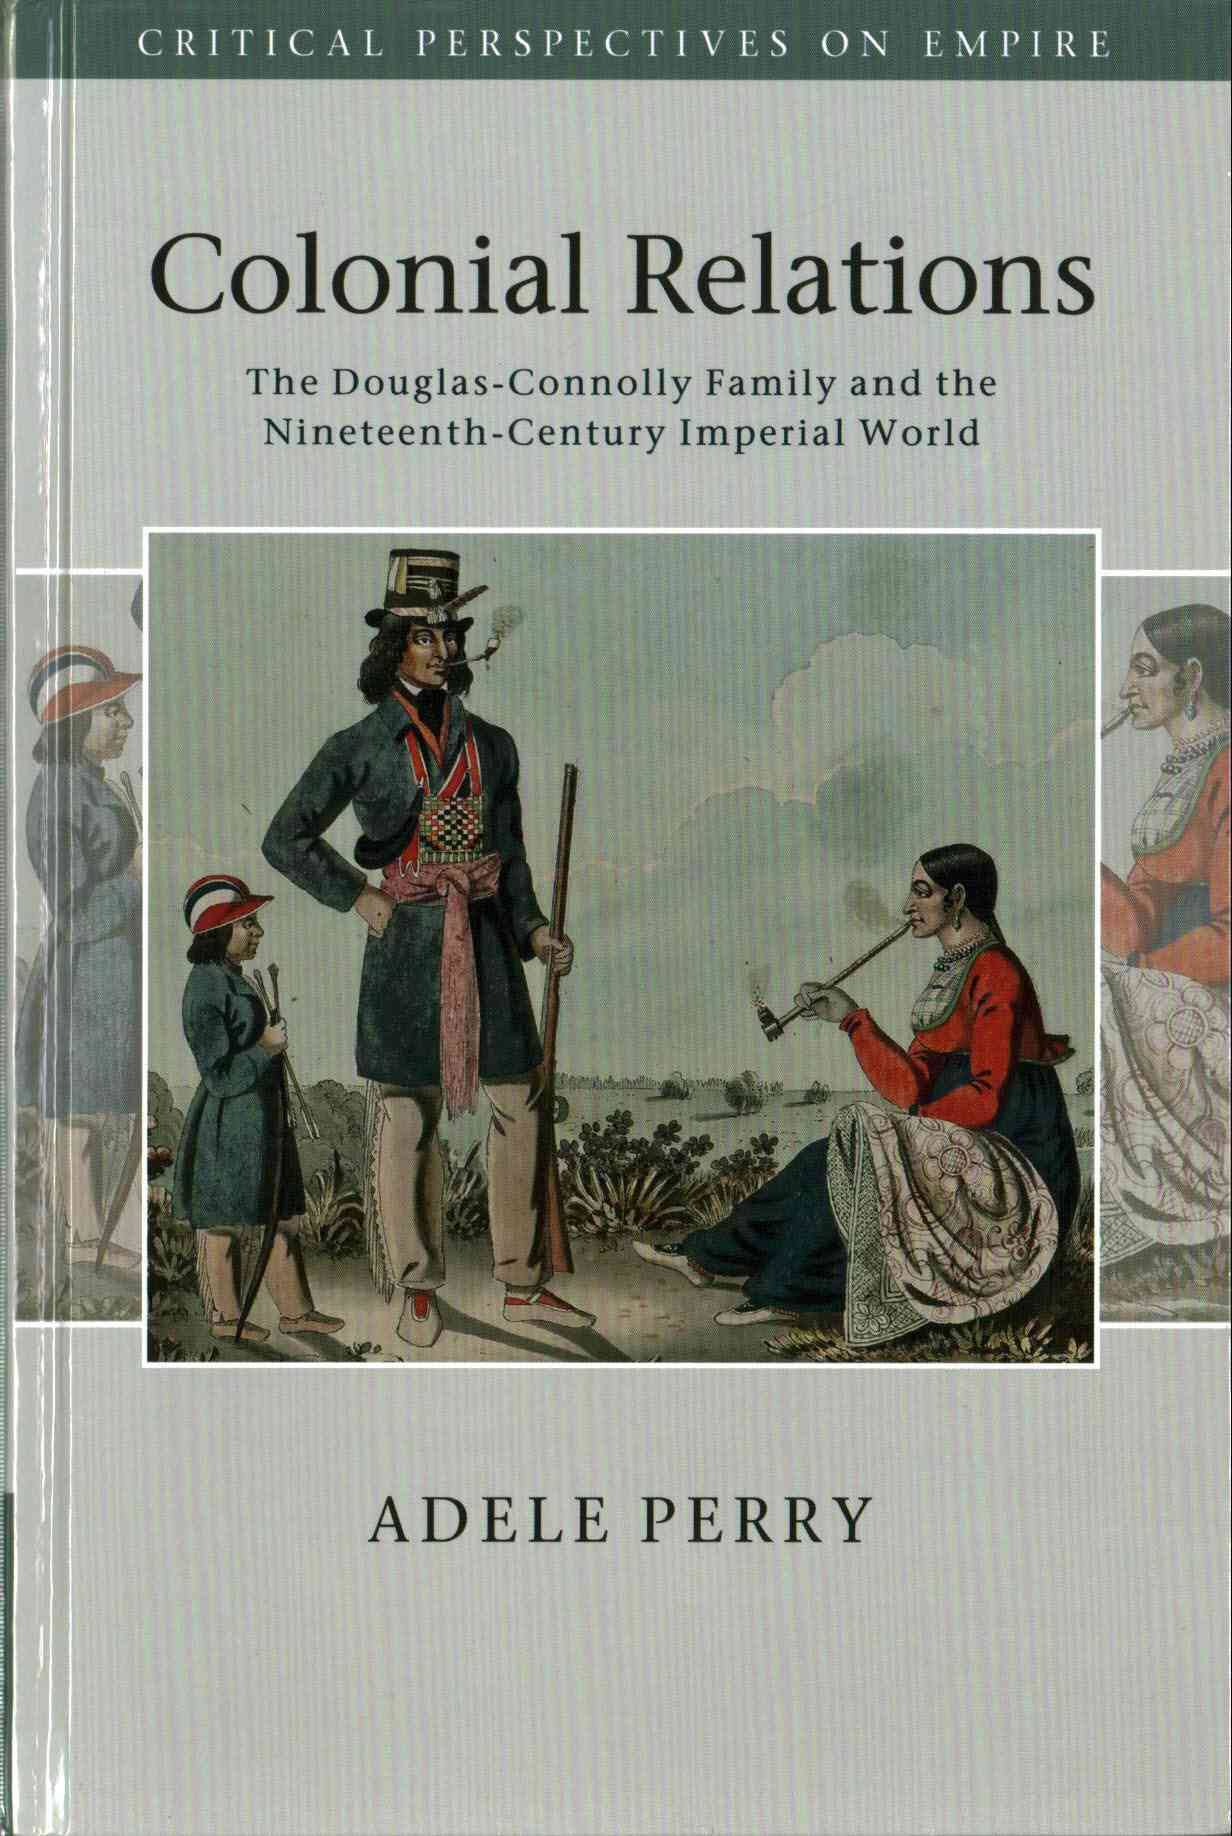 Colonial Relations The Douglas-Connolly Family and the Nineteenth-Century Imperial World